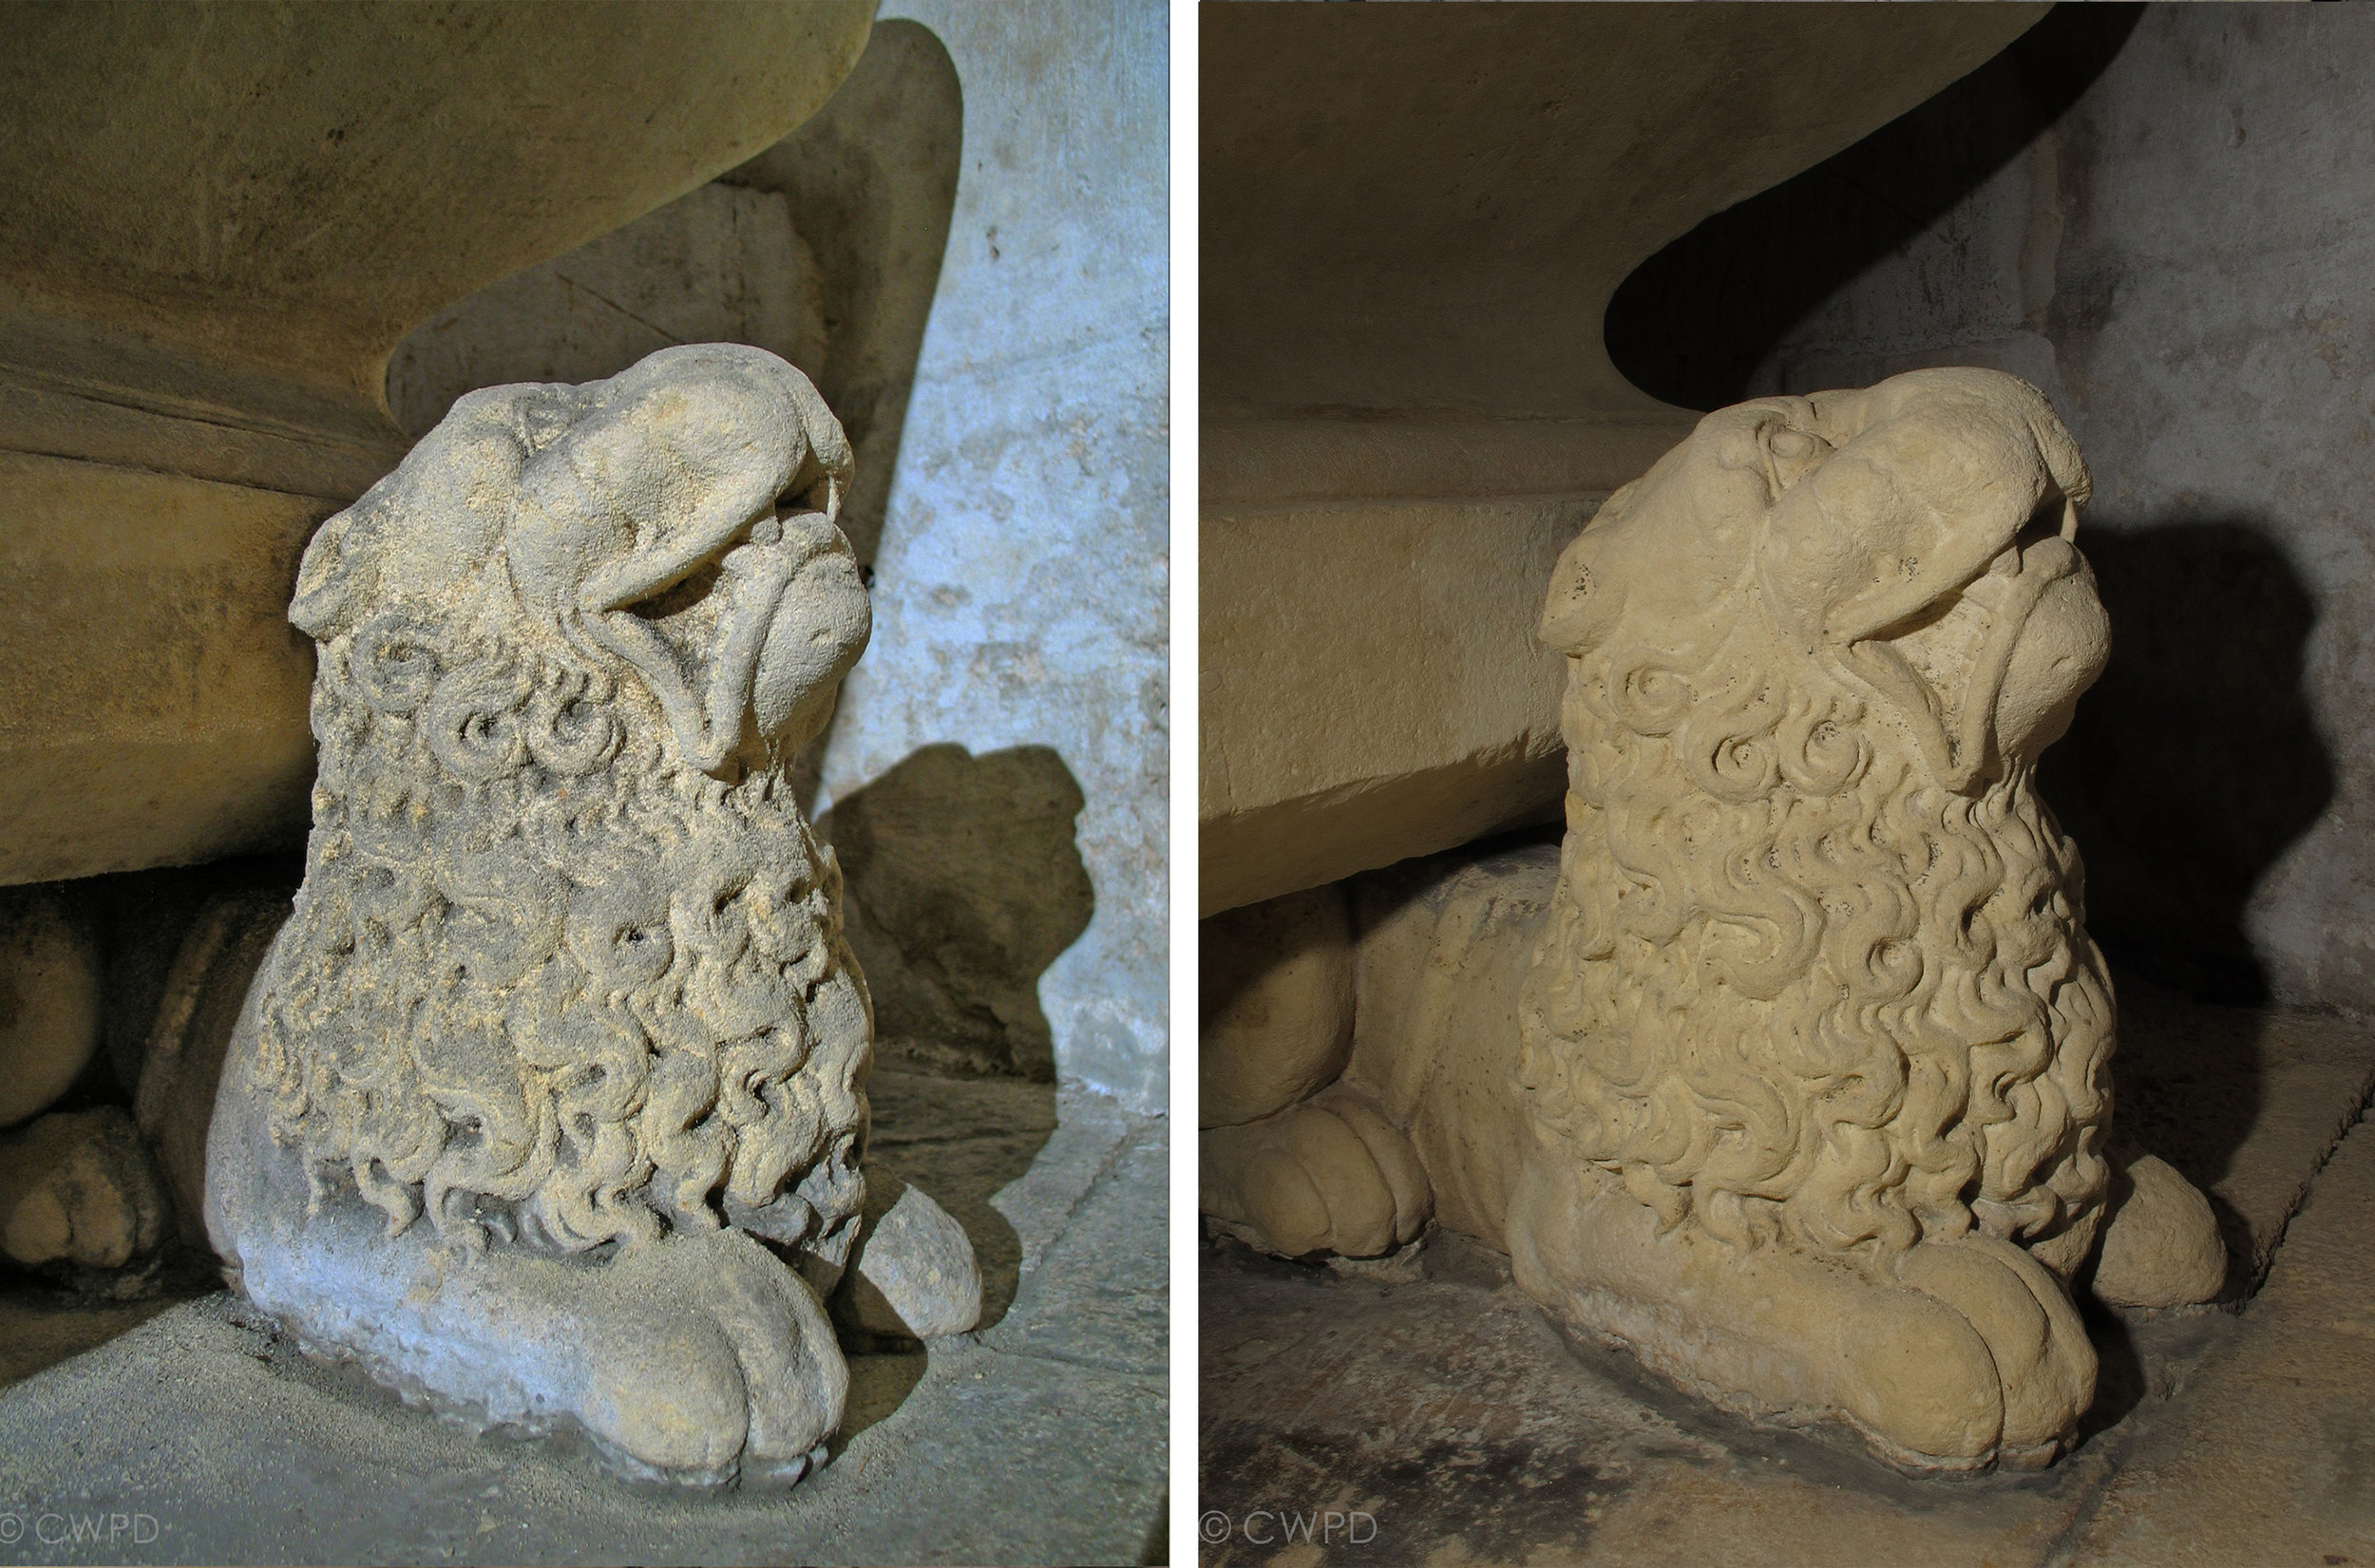  Detail of the limestone tomb monuments before (left) and after (right) consolidation and cleaning.&nbsp;  Image © Courtauld CWPD 